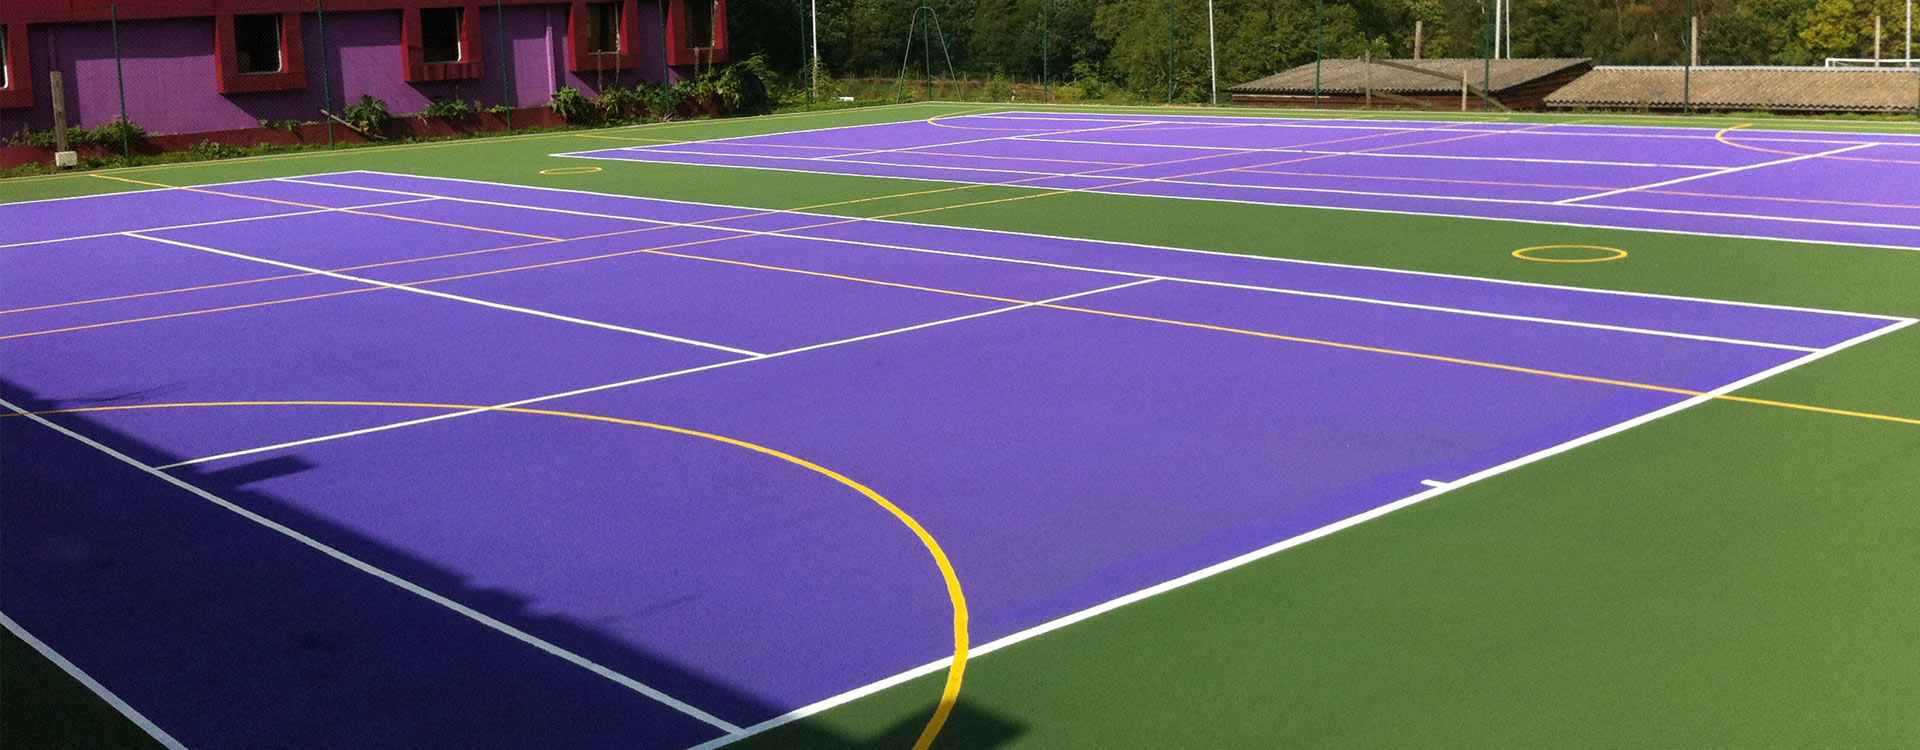 Recolouring Sports Court Surfaces Soft Surfaces Ltd: The UK s Leading